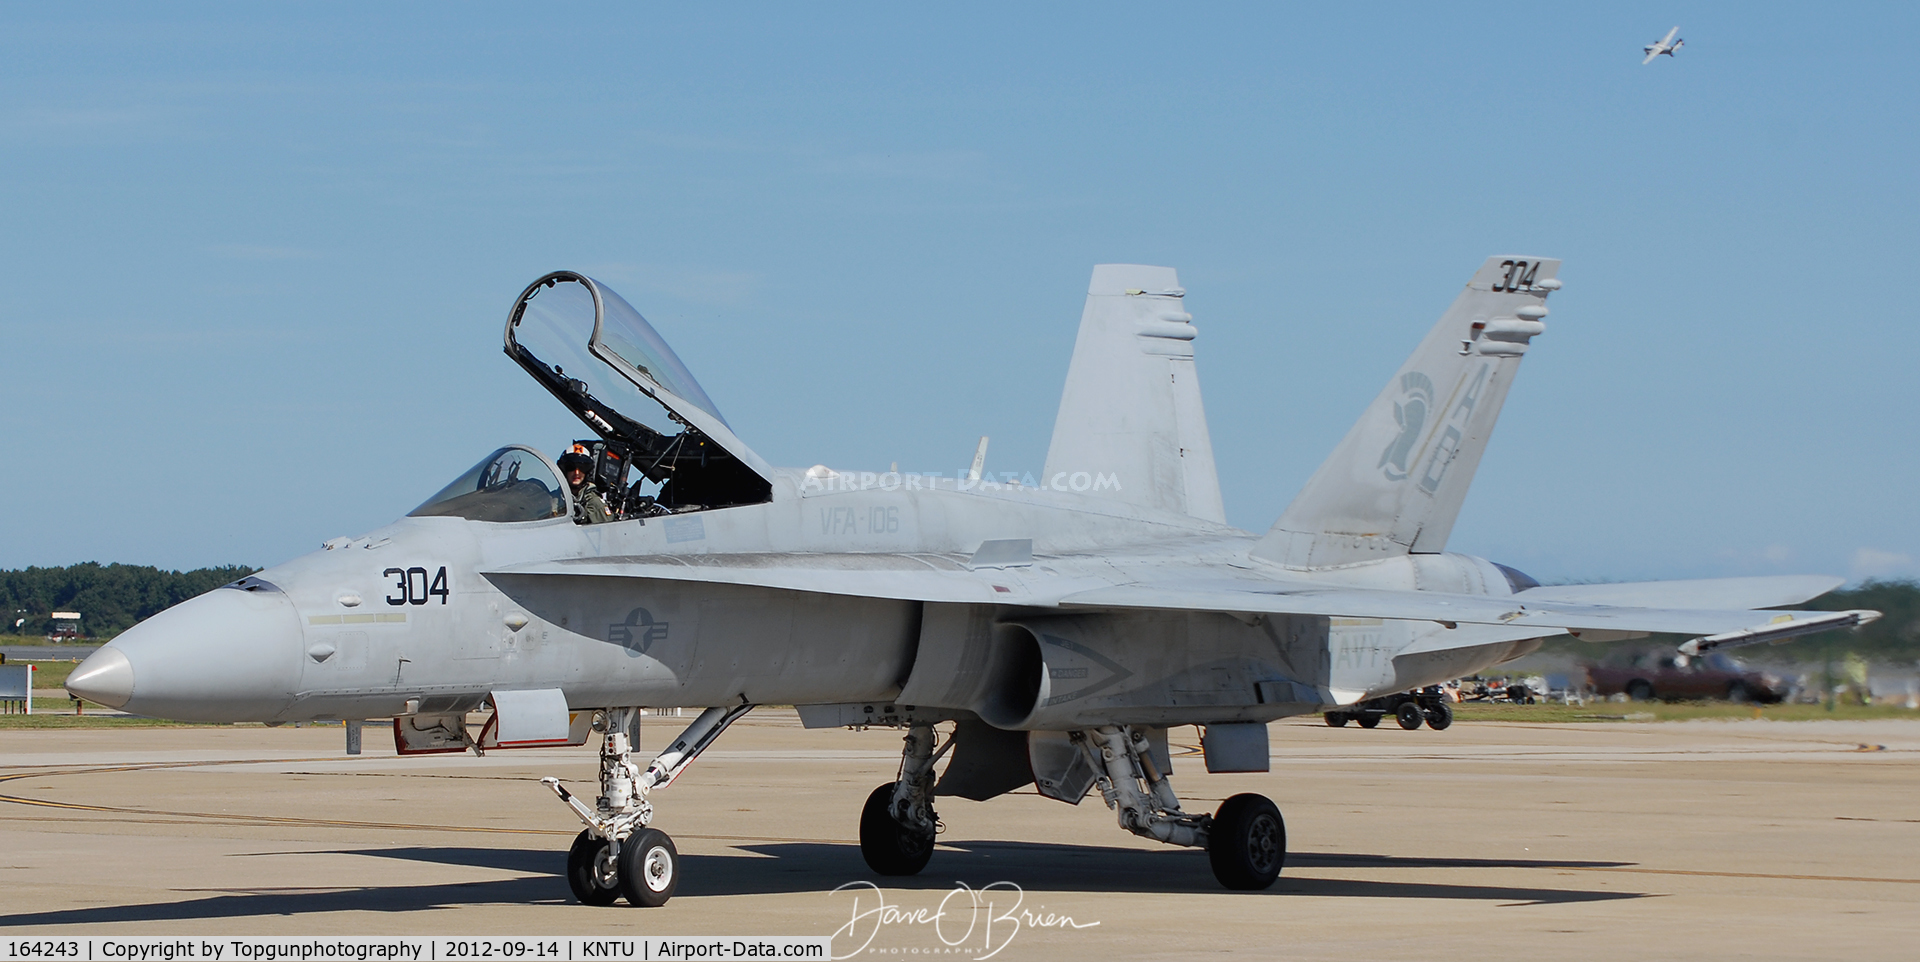 164243, McDonnell Douglas F/A-18C Hornet C/N 1006/C227, Legacy Demo taxing back to the hot ramp